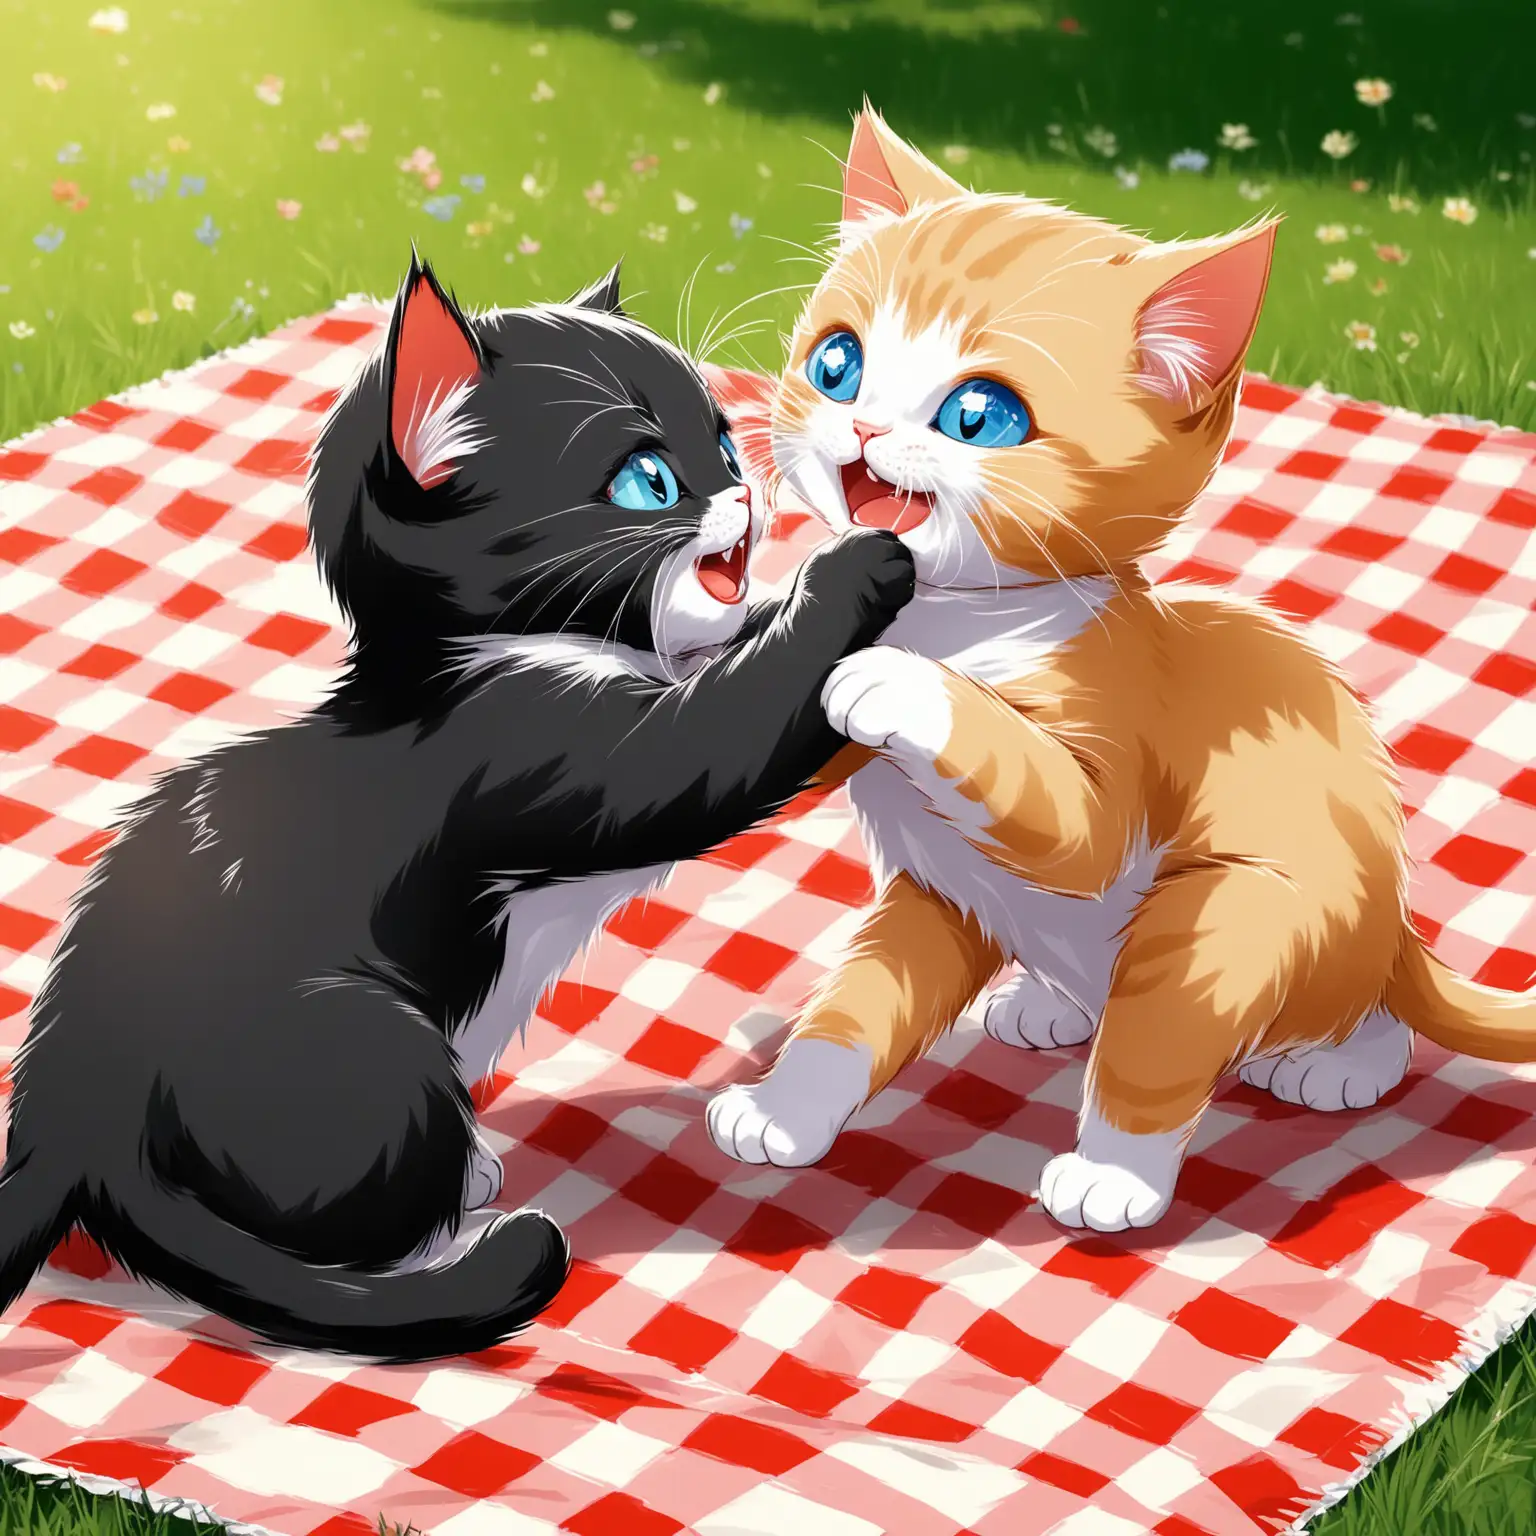 Two Playful Kittens on a Picnic Blanket